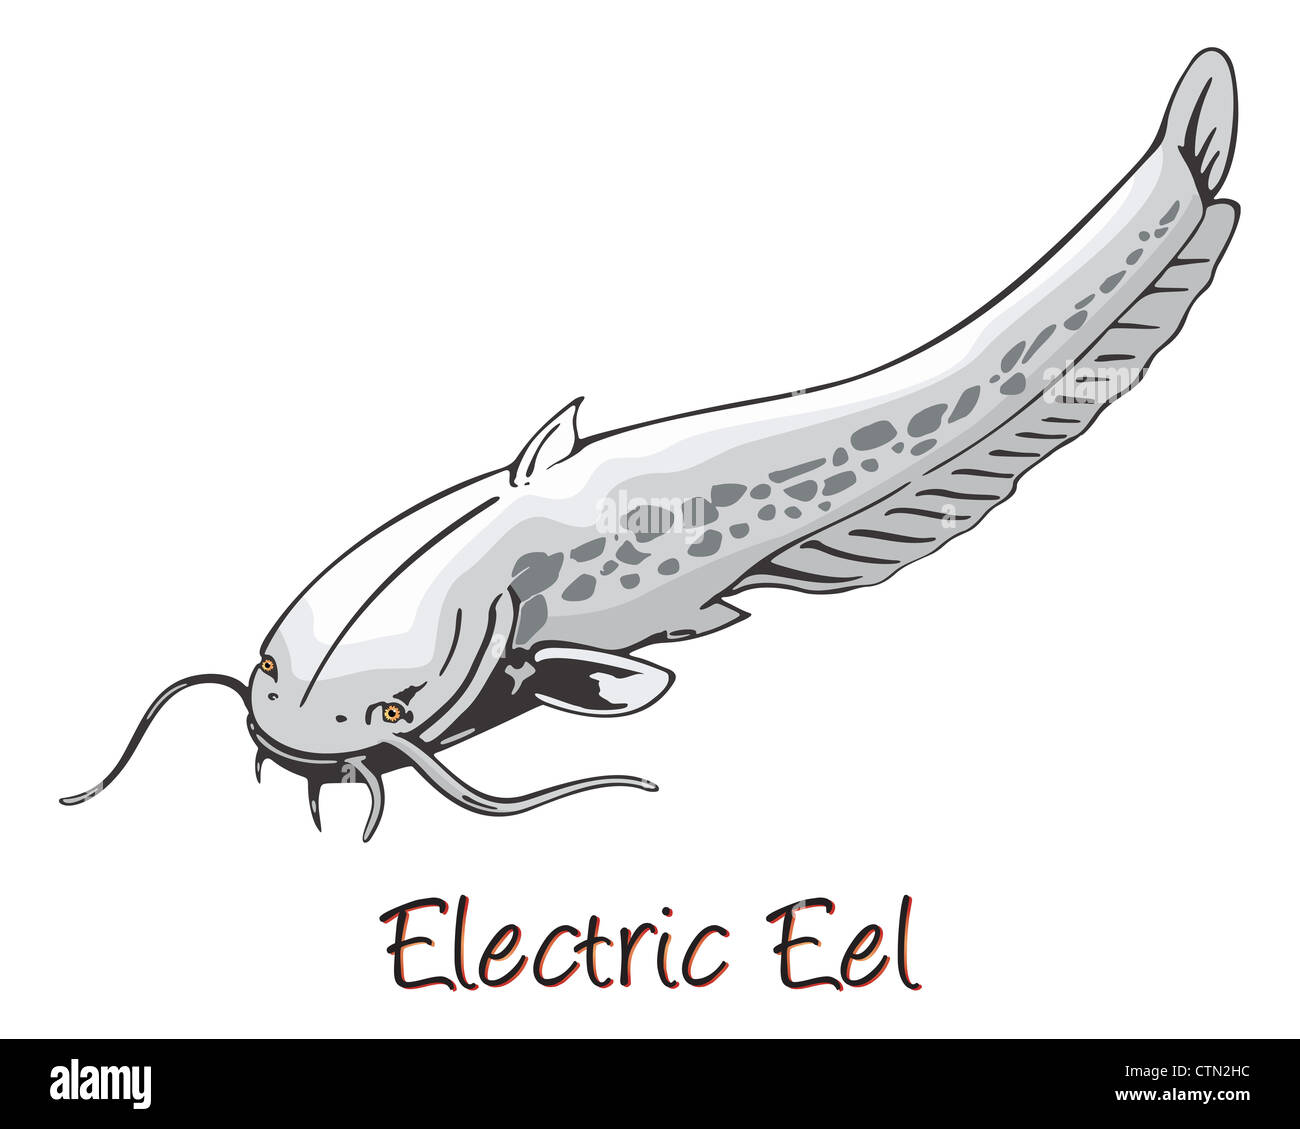 Electric Eel, Color Illustration Stock Photo